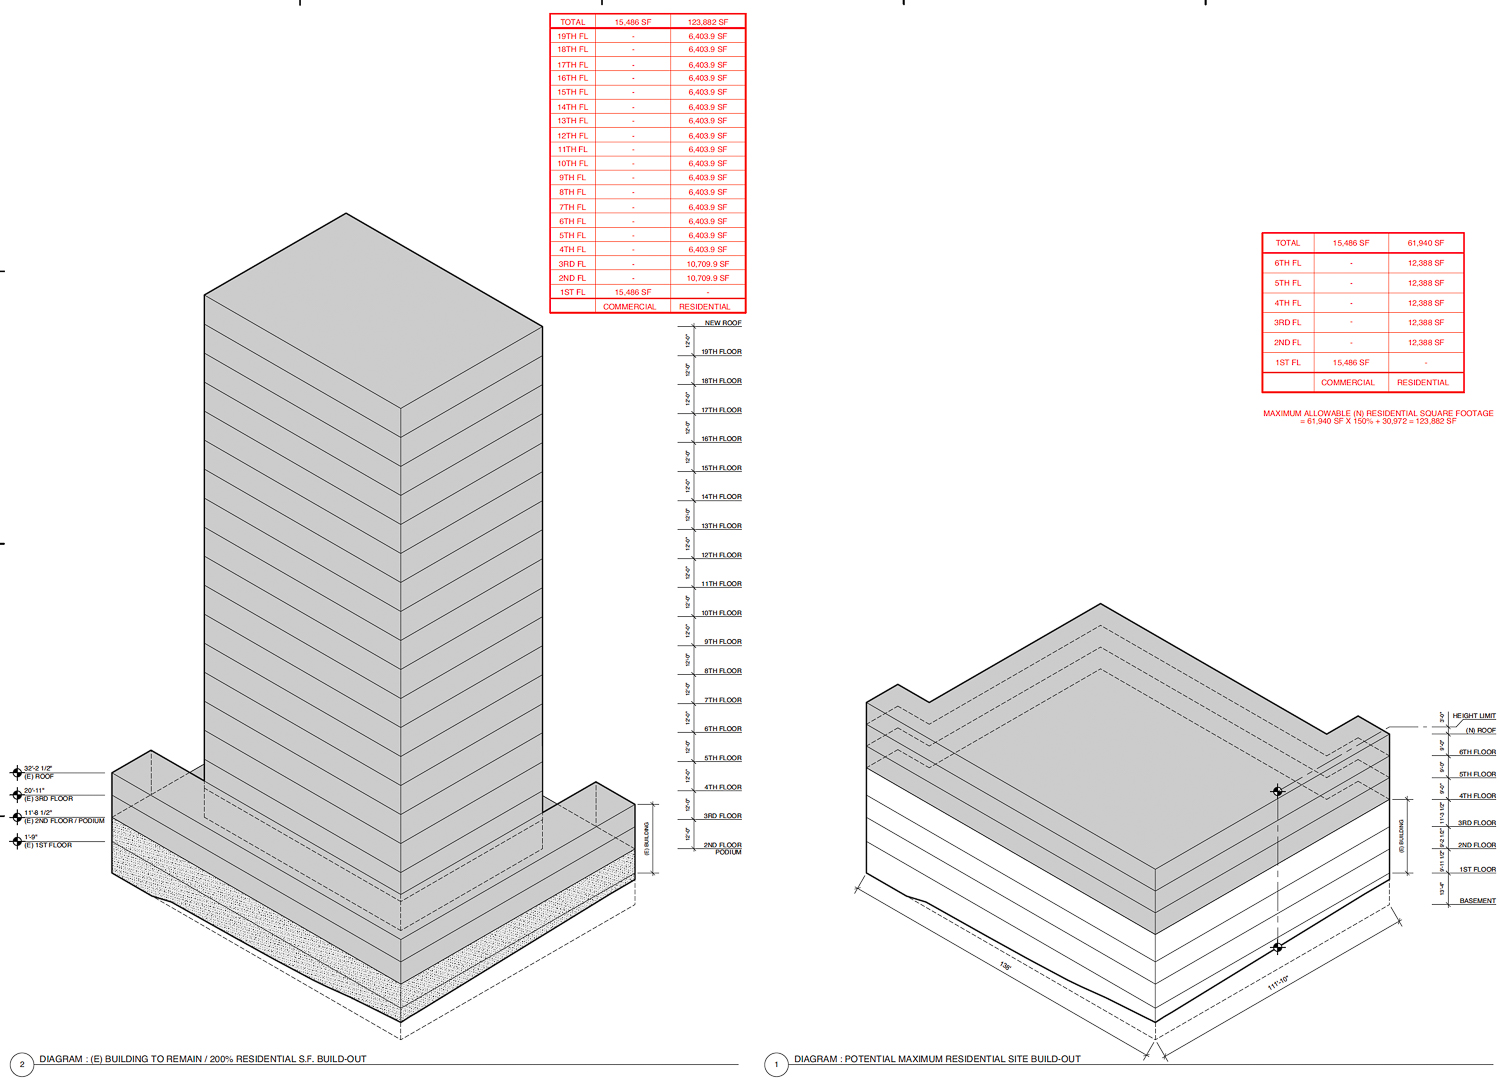 1088 Sansome Street proposal (left) and base density project (right), image by Mark Horton Architecture